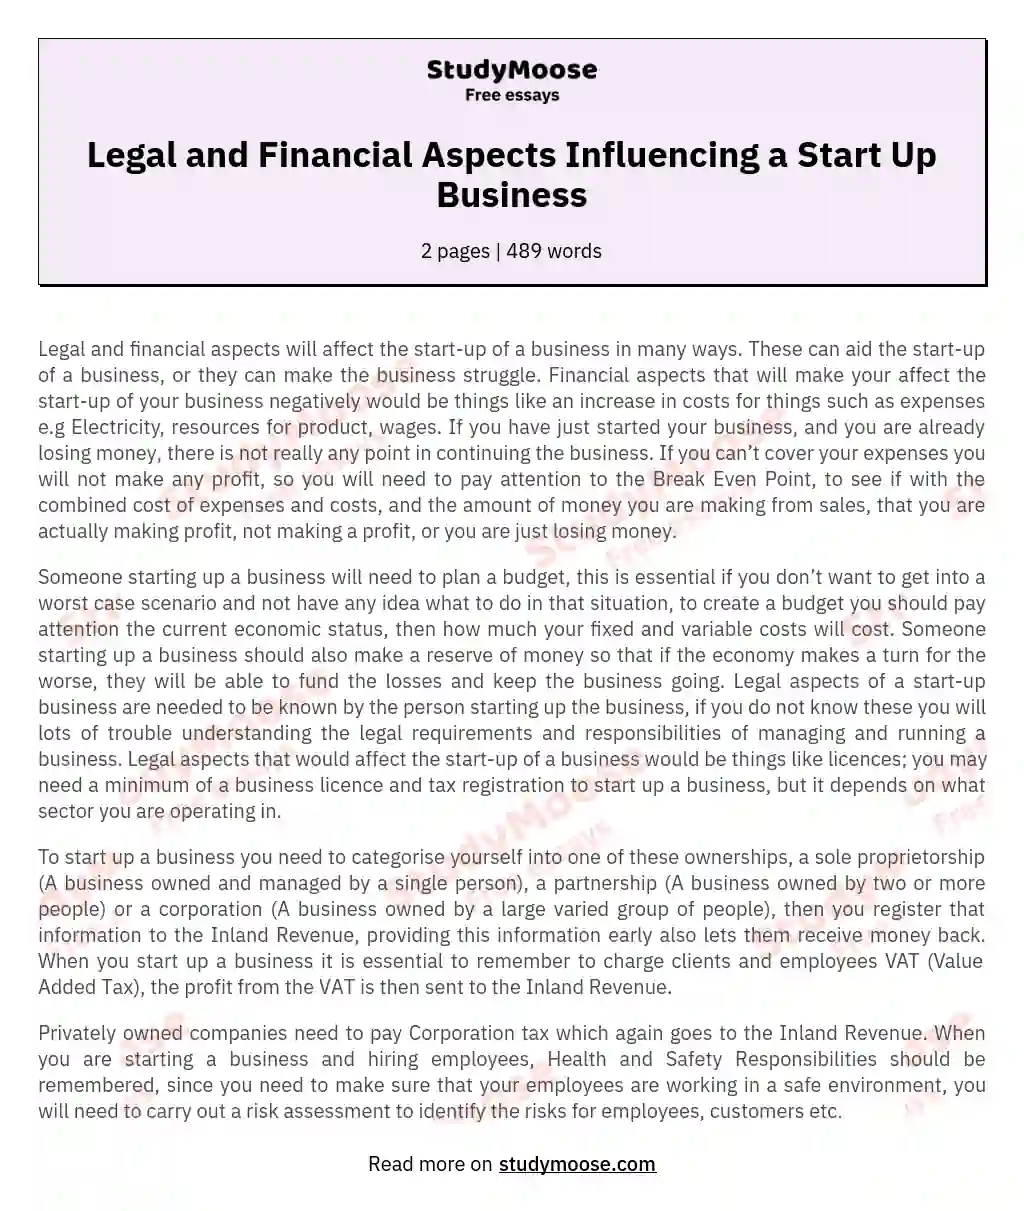 Legal and Financial Aspects Influencing a Start Up Business